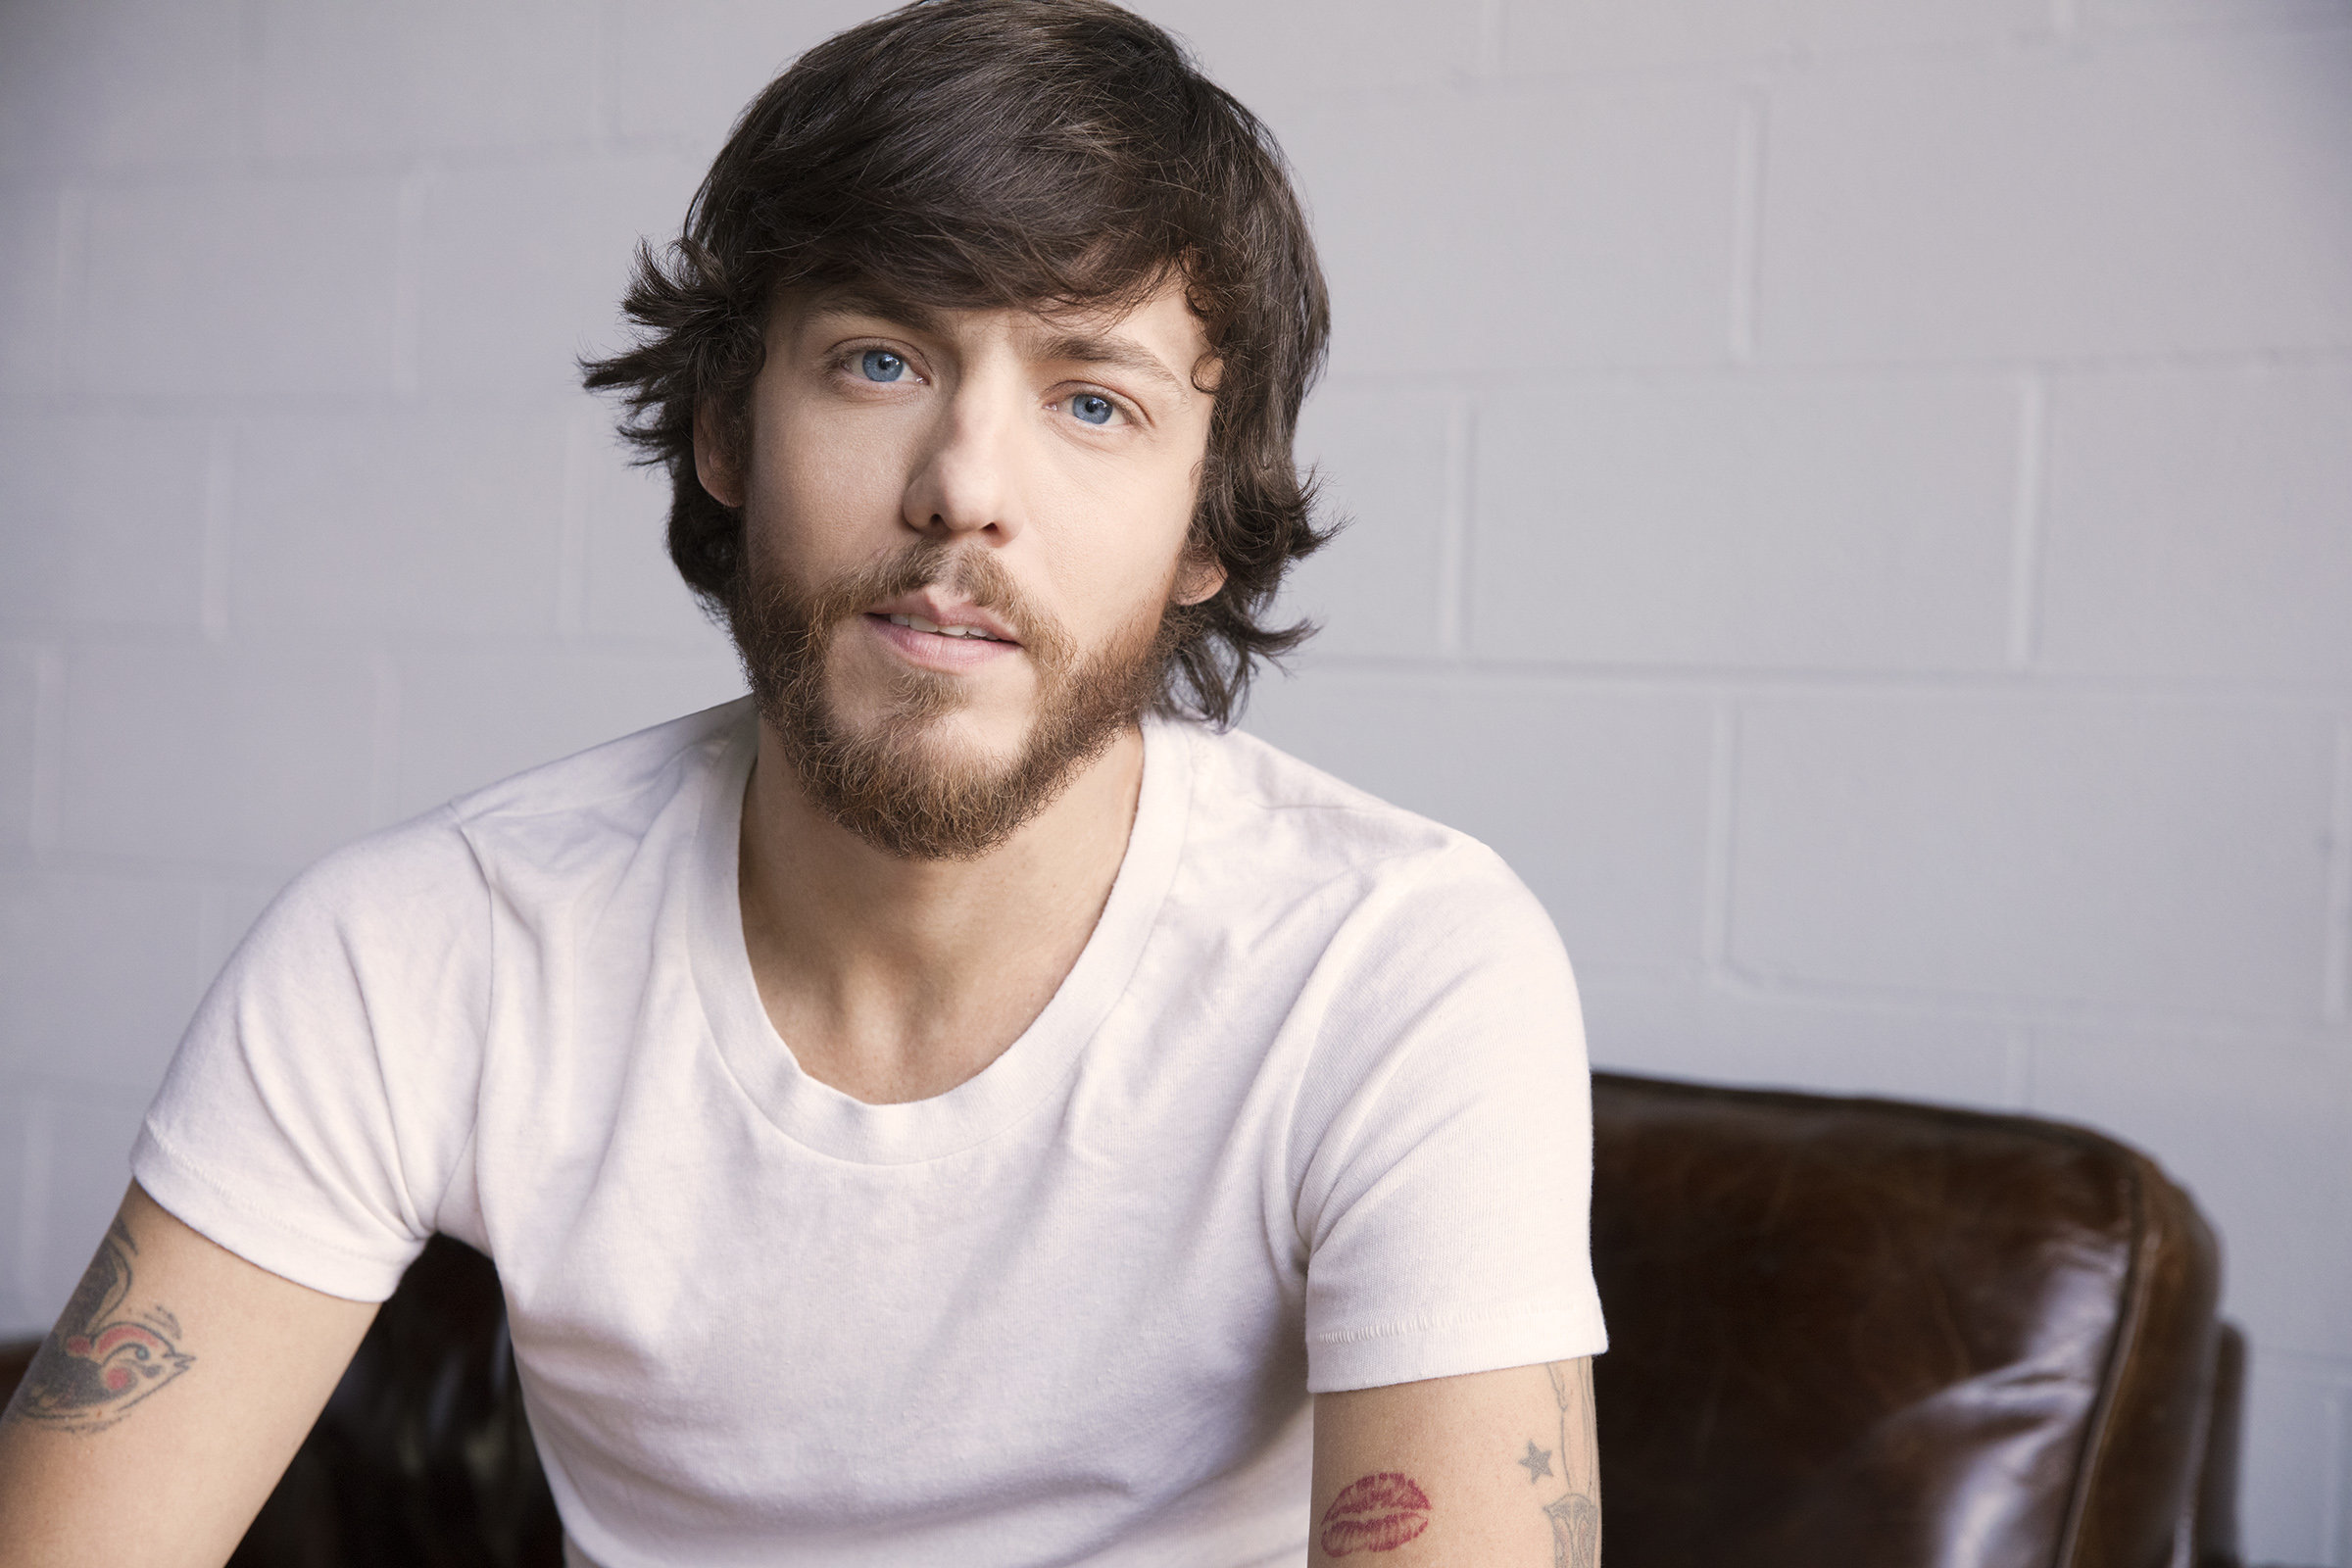 Chris Janson’s “Holdin’ Her” Hits Top 20!